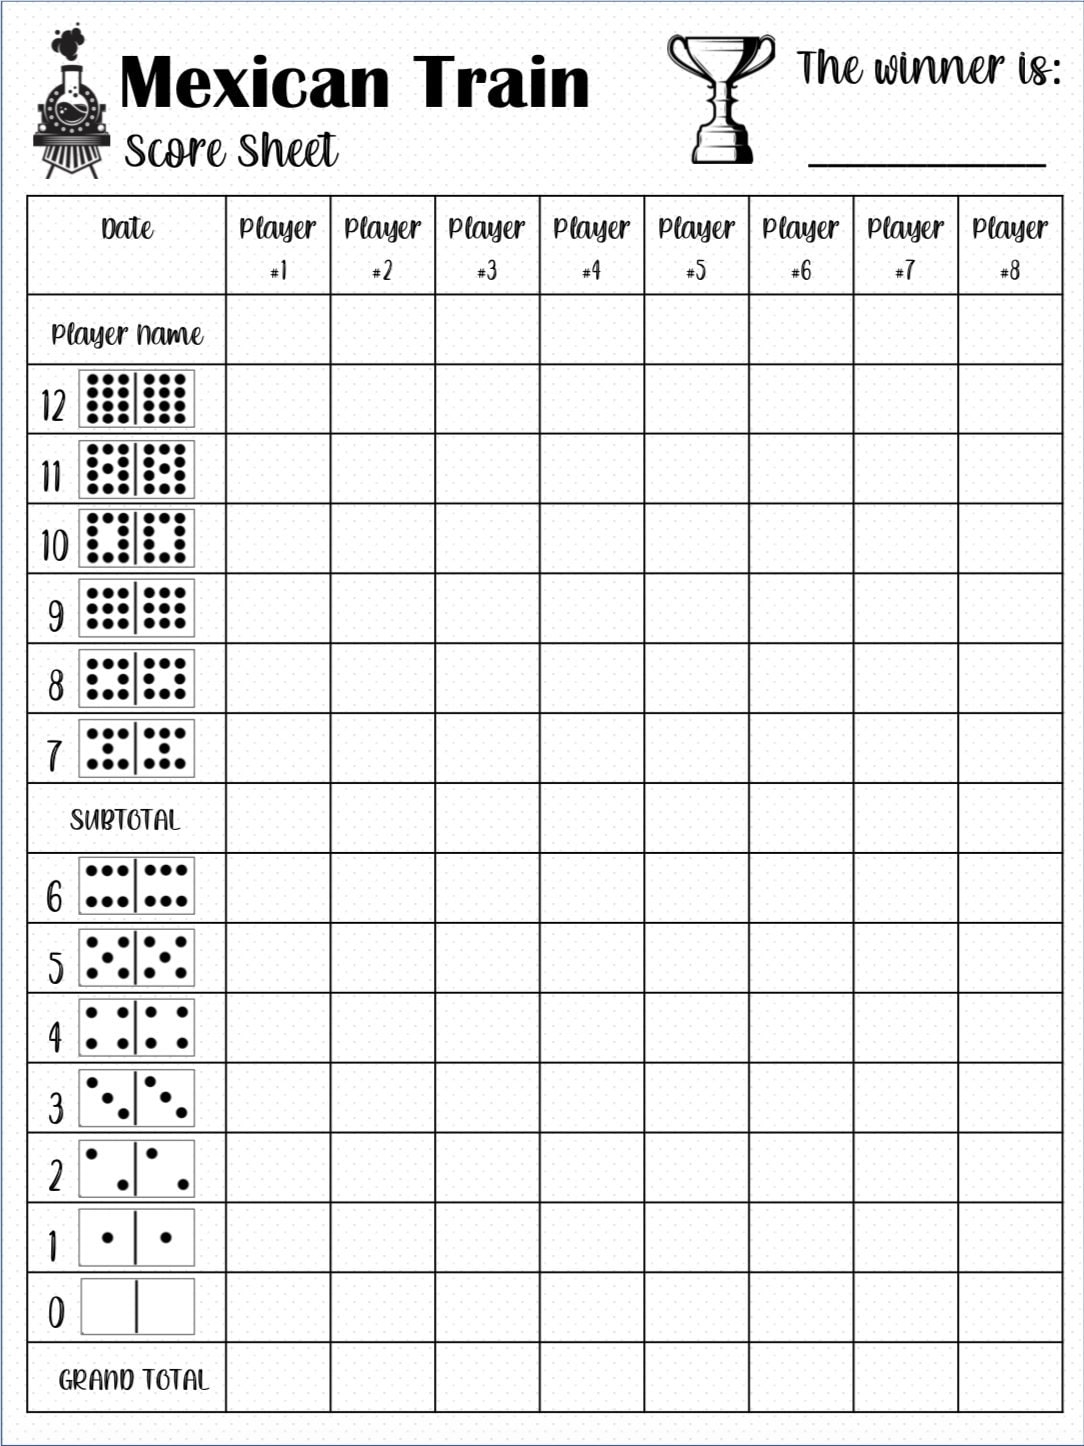 Mexican Train Score Card Mexican Train Scoresheet Mexican Train Score Pads Printable File PDF Download 8 5x11 Etsy Sweden